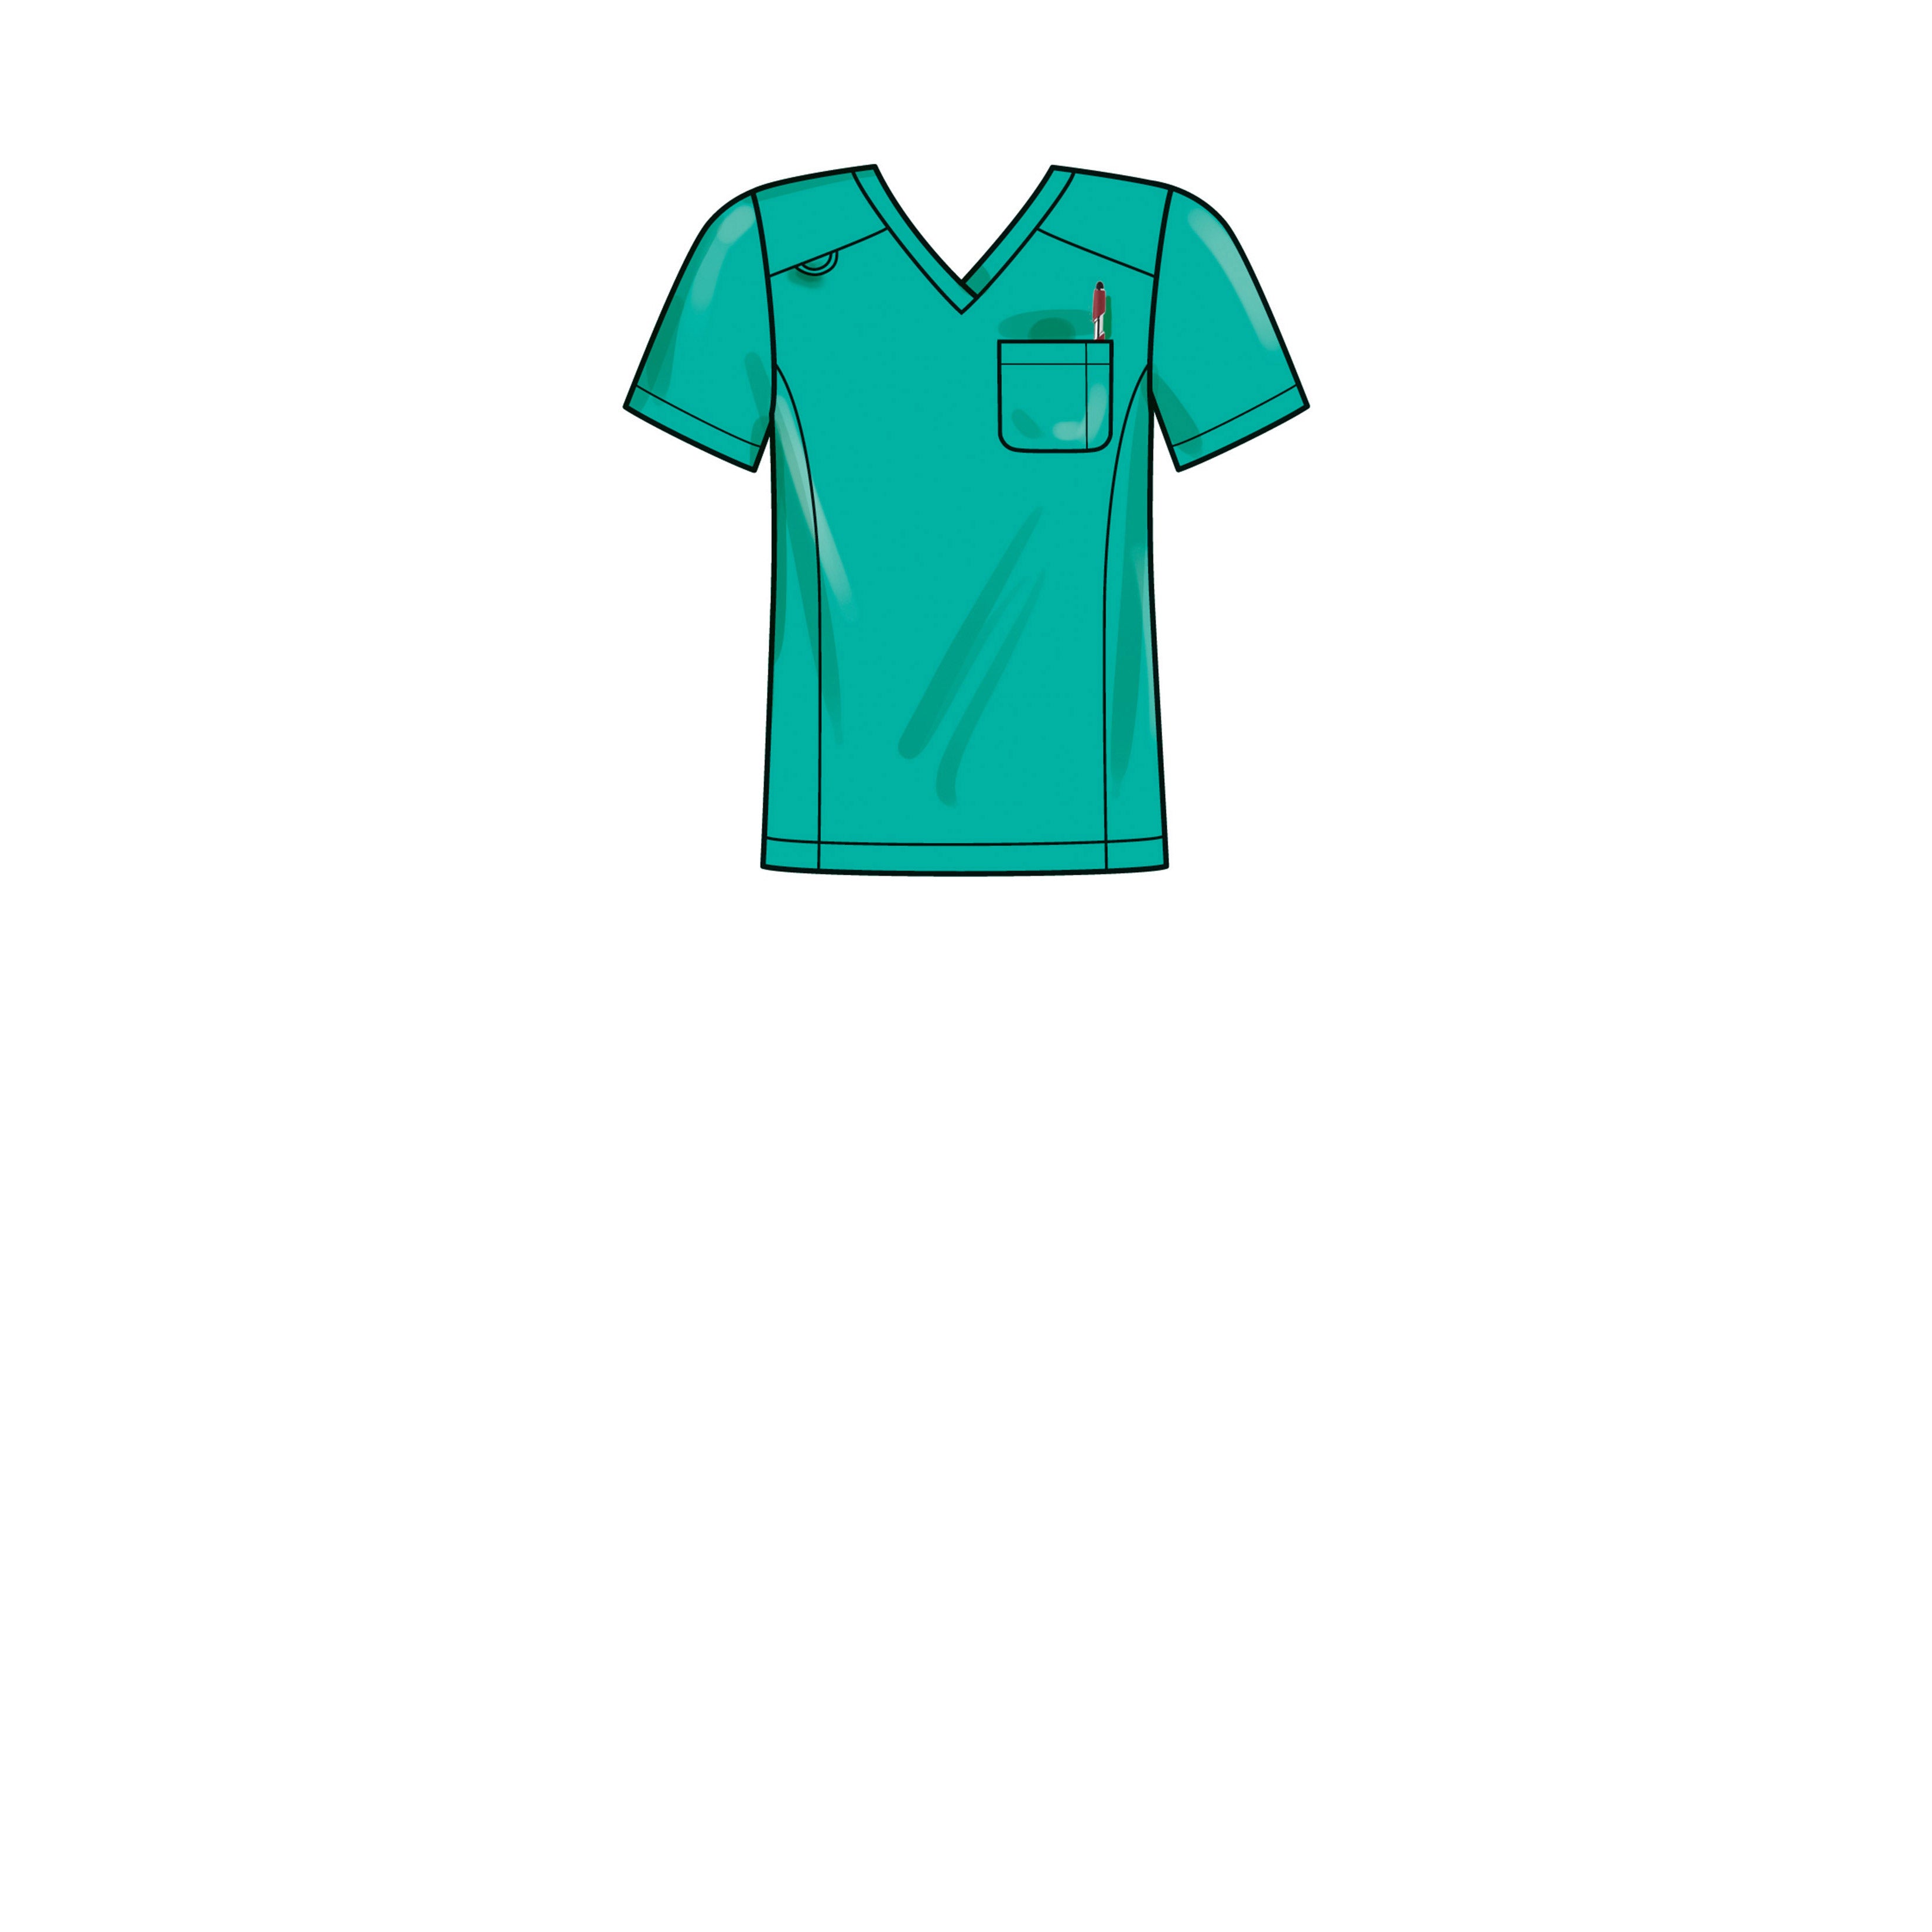 Simplicity 9650 Unisex Scrubs sewing pattern from Jaycotts Sewing Supplies